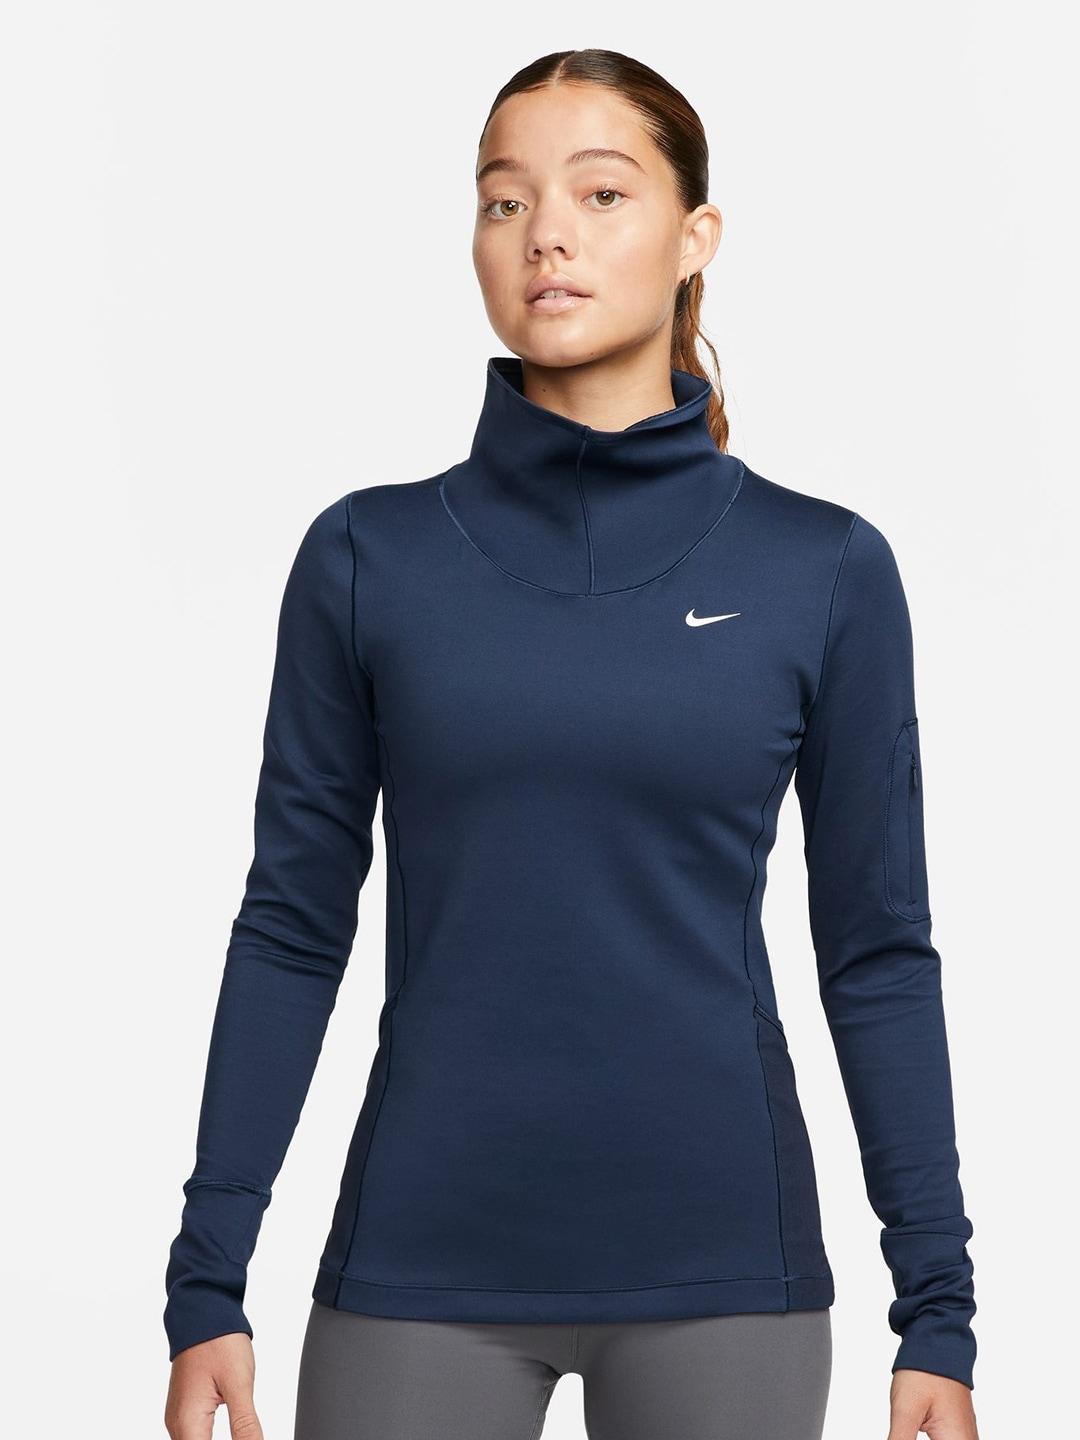 nike--pro-therma-fit-high-neck-long-sleeve-tops